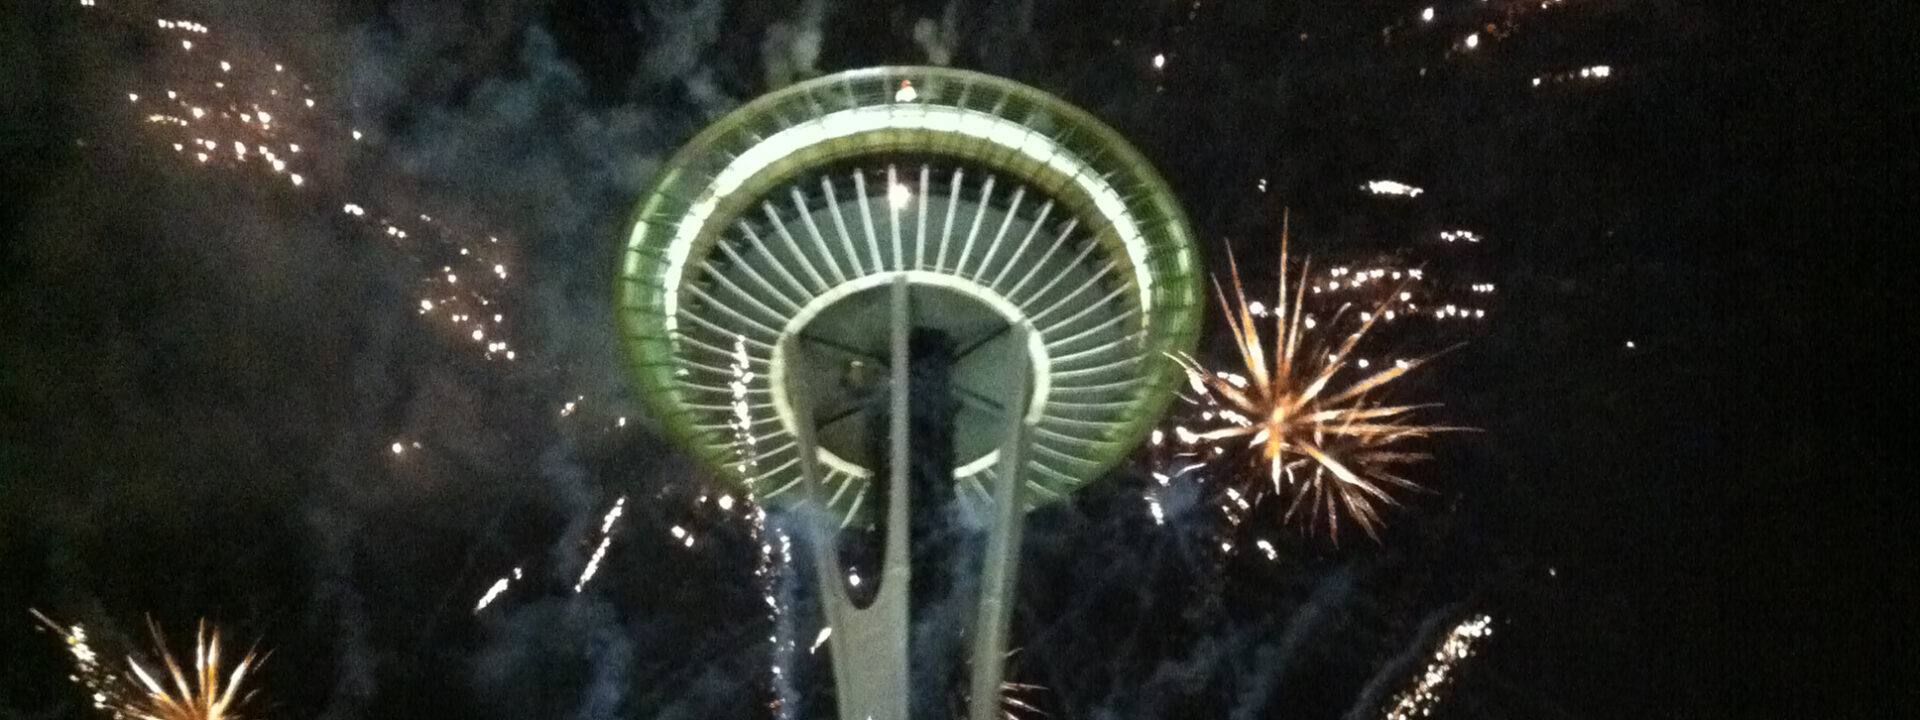 New Year's Eve in Seattle at the Space Needle